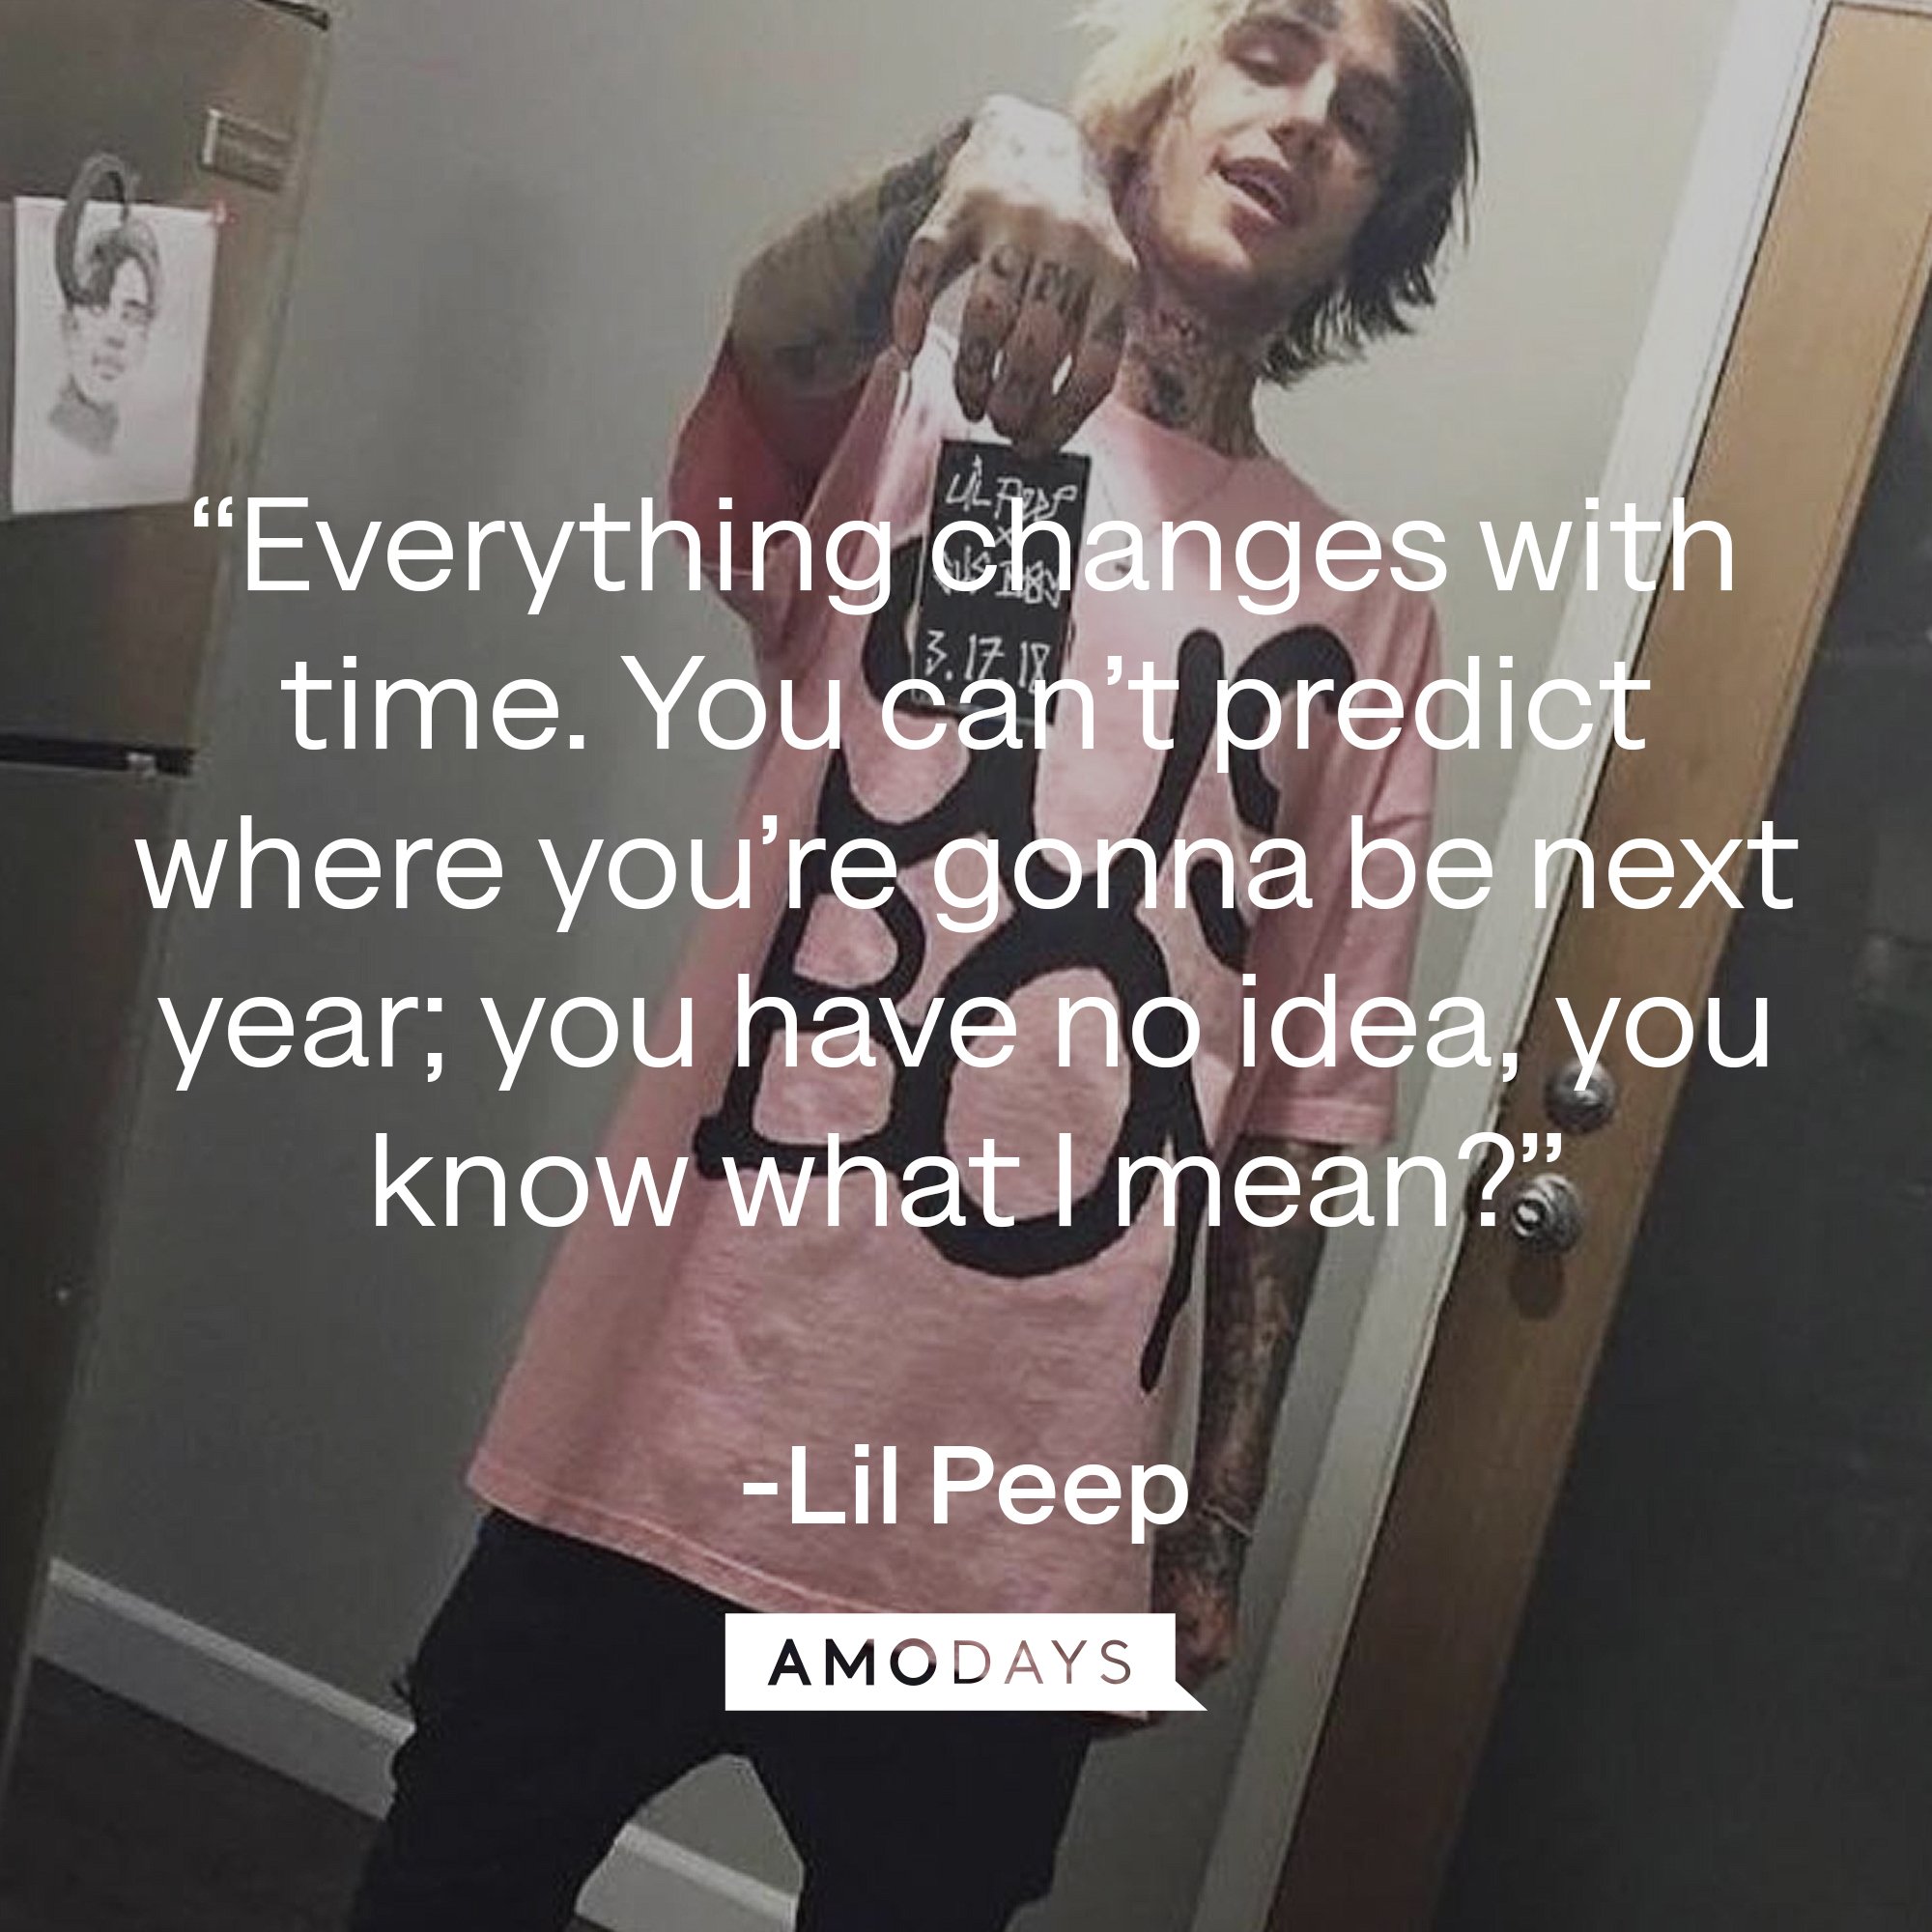 Lil Peep's quote: “Everything changes with time. You can’t predict where you’re gonna be next year; you have no idea, you know what I mean?” | Image: AmoDays